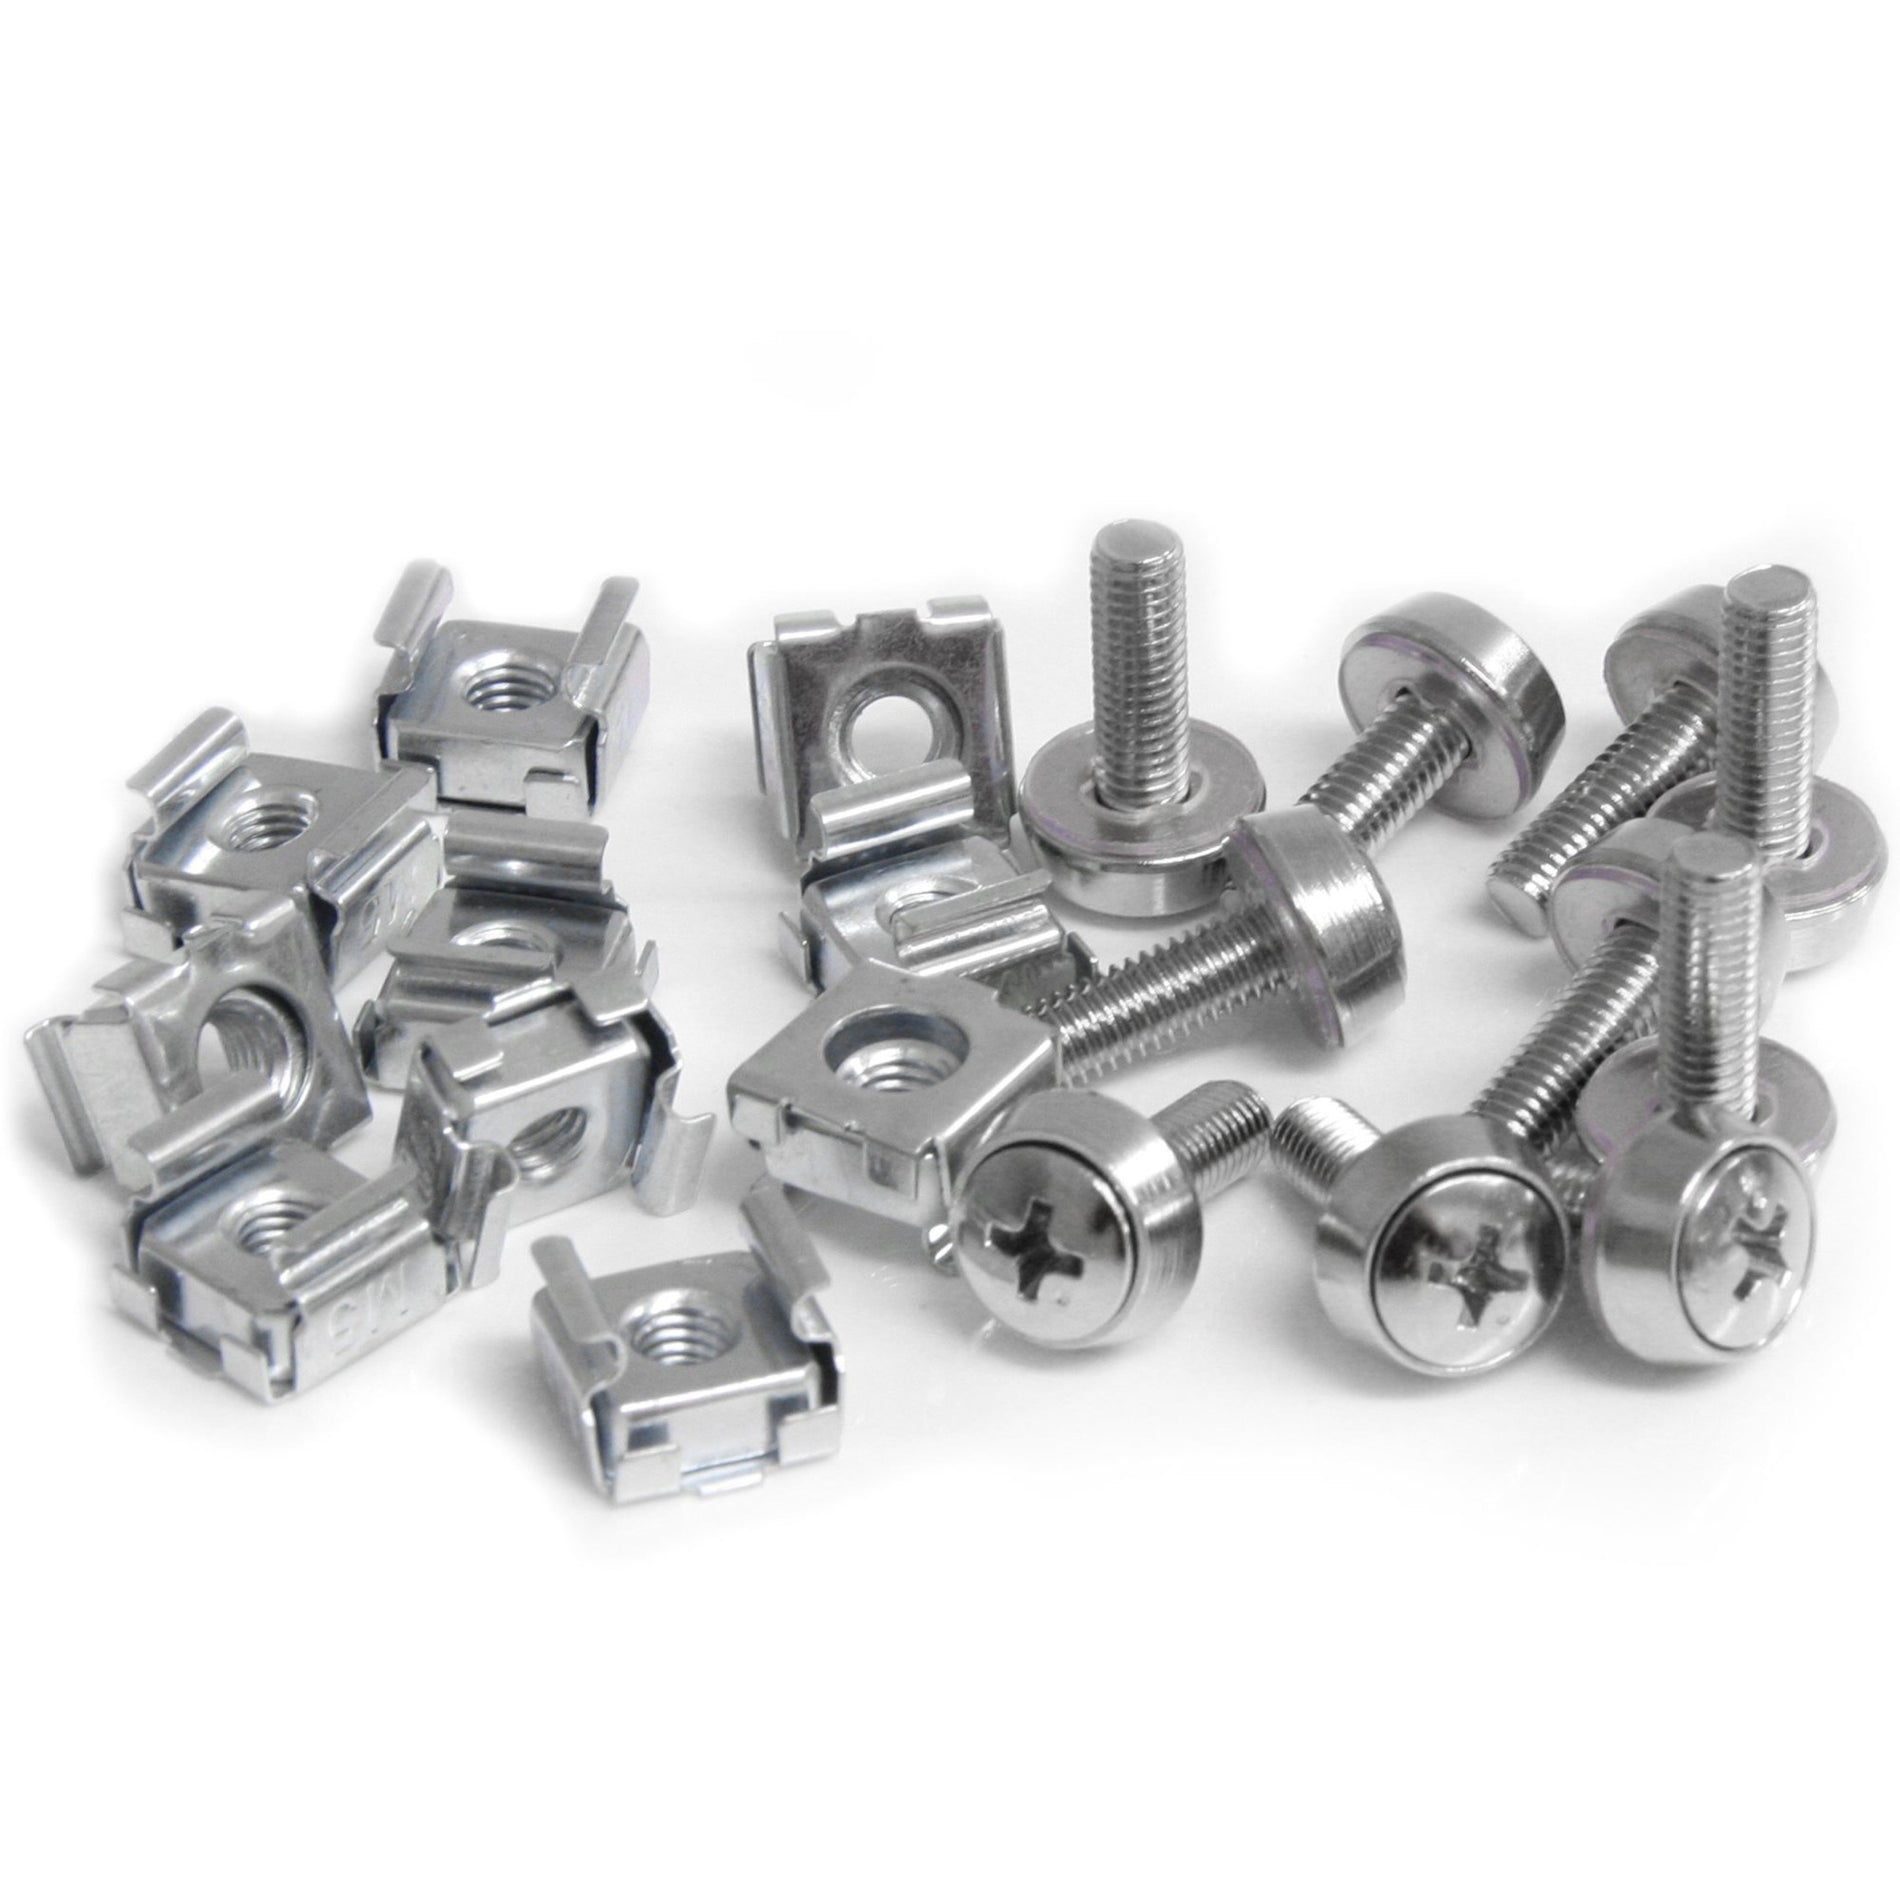 StarTech.com CABSCREWM5 50 Pkg M5 Mounting Screws and Cage Nuts for Server Rack Cabinet, Rust Resistant, Nickel Plated